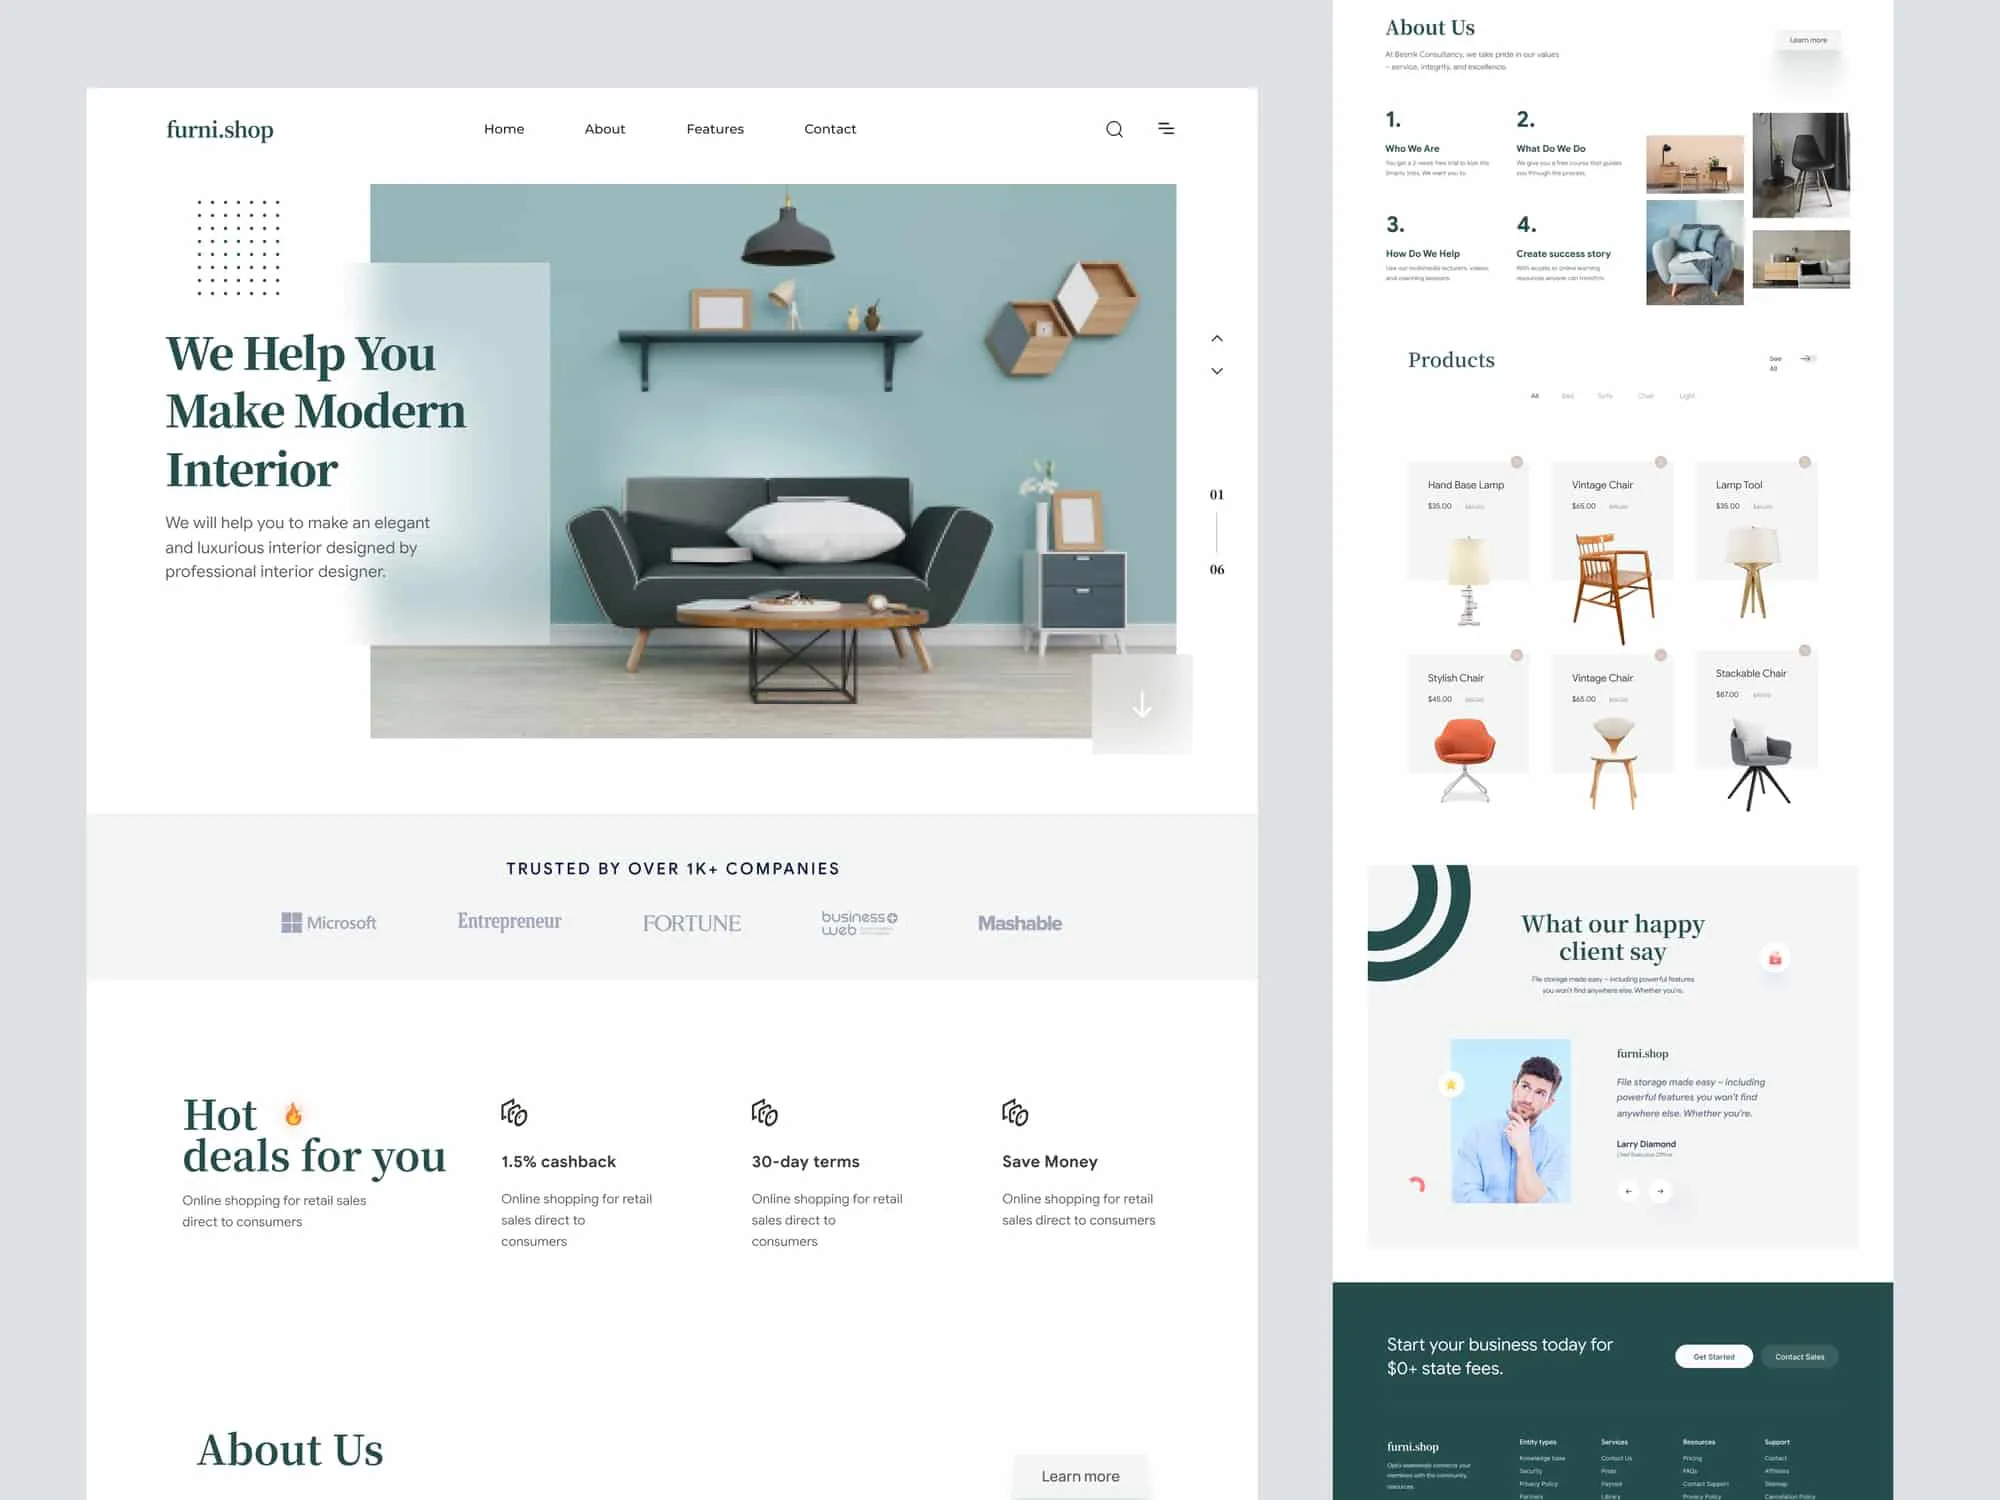 Ecommerce/Shopify Website Landing Page Design For Furniture Company for Figma and Adobe XD